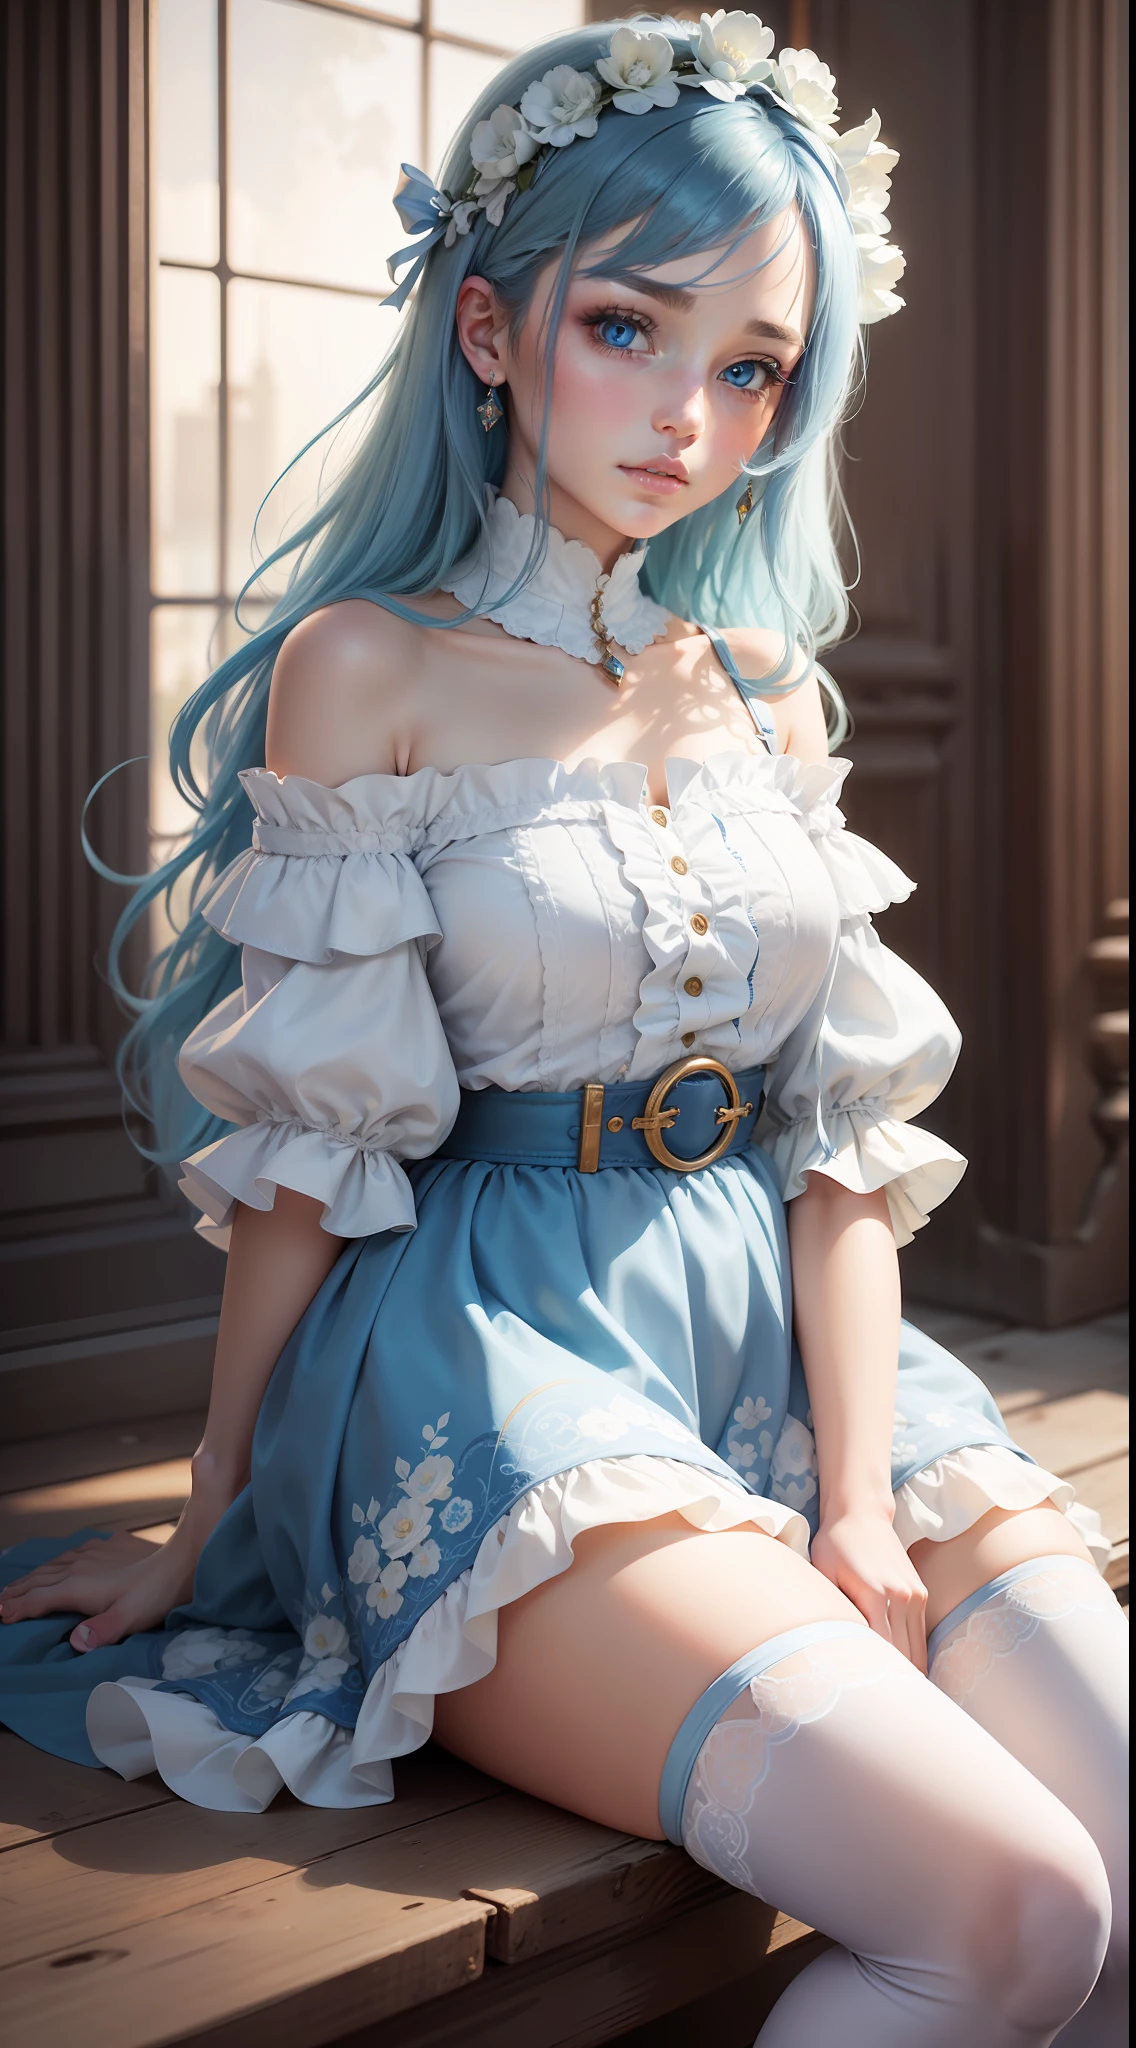 high high quality，tmasterpiece，Delicate facial features，Delicate hair，Delicate eyes，Two-dimensional girl，Long light blue hair，blue colored eyes，skirt with frills，Blue and white lace dress，Dreamy style, fantasy style clothing, The clothes are blue and white and off-the-shoulder，Blue and white belt，Short blue skirt，White socks，Blue high boots，infinite details，The proportions are correct，Picture quality HD，full bodyesbian，MagazineCover，8K high quality detailed art（Delicate facial portrayal）（Fine hair portrayal）（highest  quality）（Master masterpieces）（High degree of completion）（a sense of atmosphere）8k wallpaper，tmasterpiece，Best quality at best，ultra - detailed